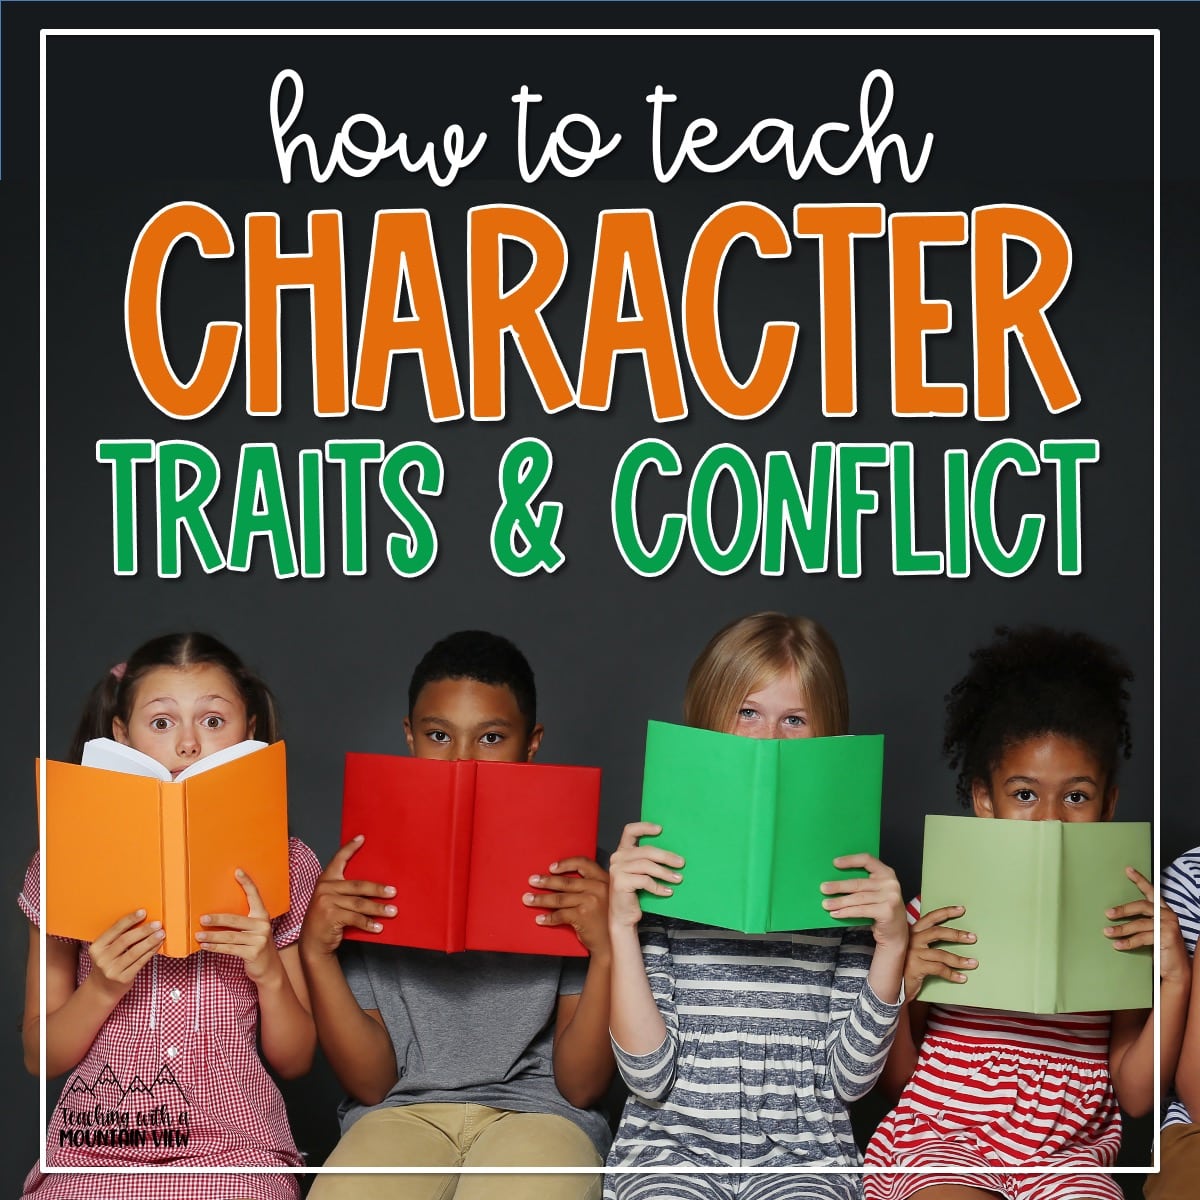 Upper elementary ideas to teach character traits and character conflict using anchor charts, interactive notebook templates, and task cards.